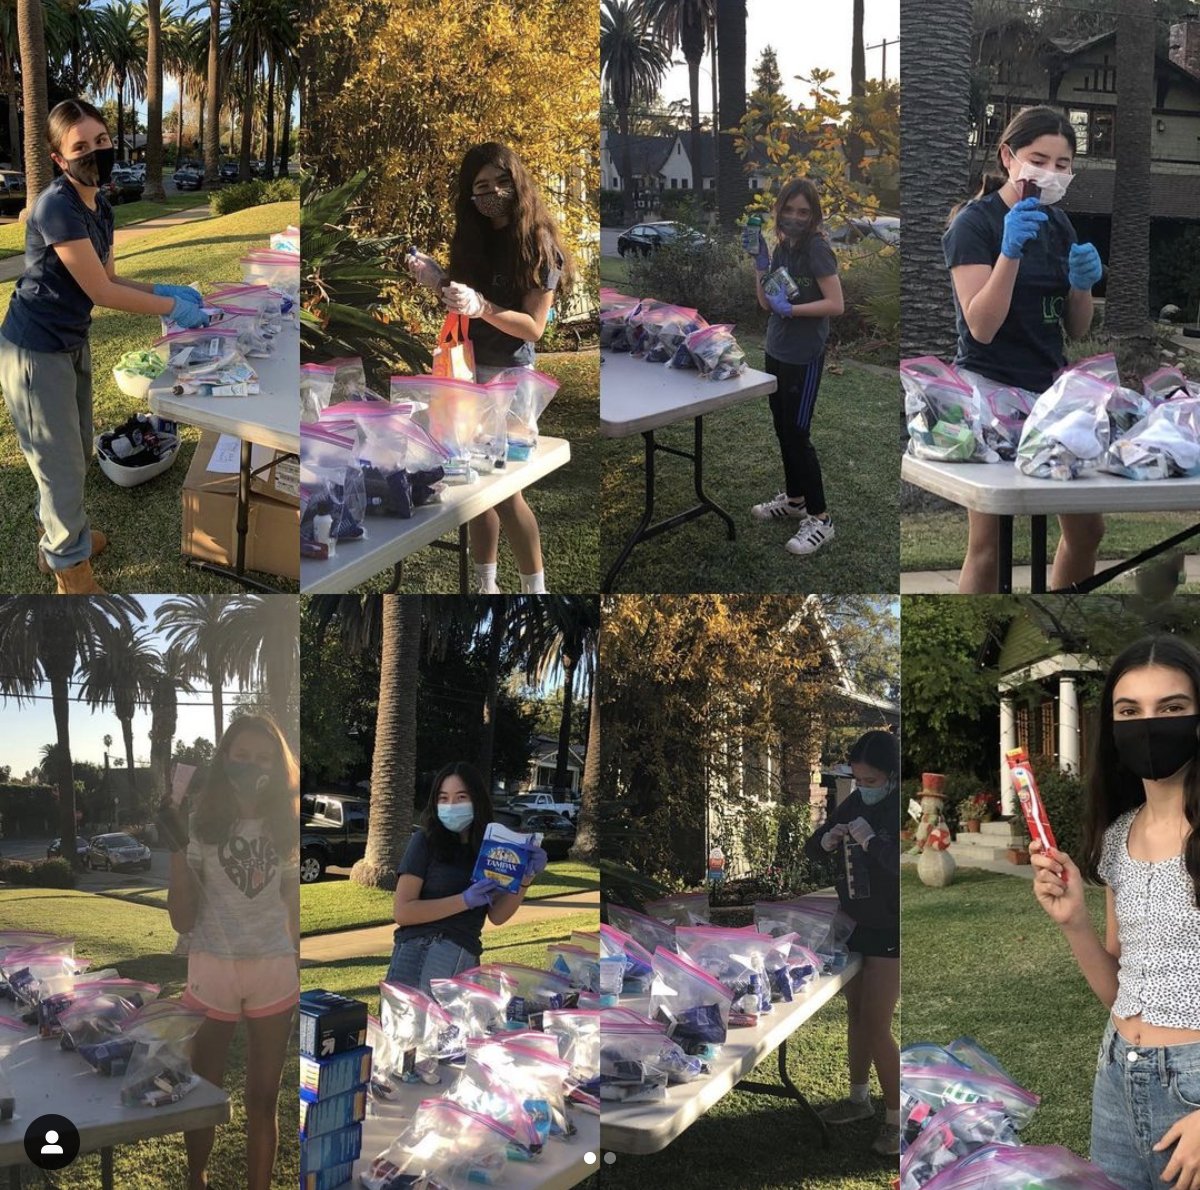 South Pasadena, CA, 2026 girls blue group wanted to thank everyone who donated to their hygiene kit project. They will be going to people in need. What a great volunteer project! 🦁 💚 💪
.
.
#Southpasadena #homelessness #teenvolunteering #wegotthis #givingback #hygienekits